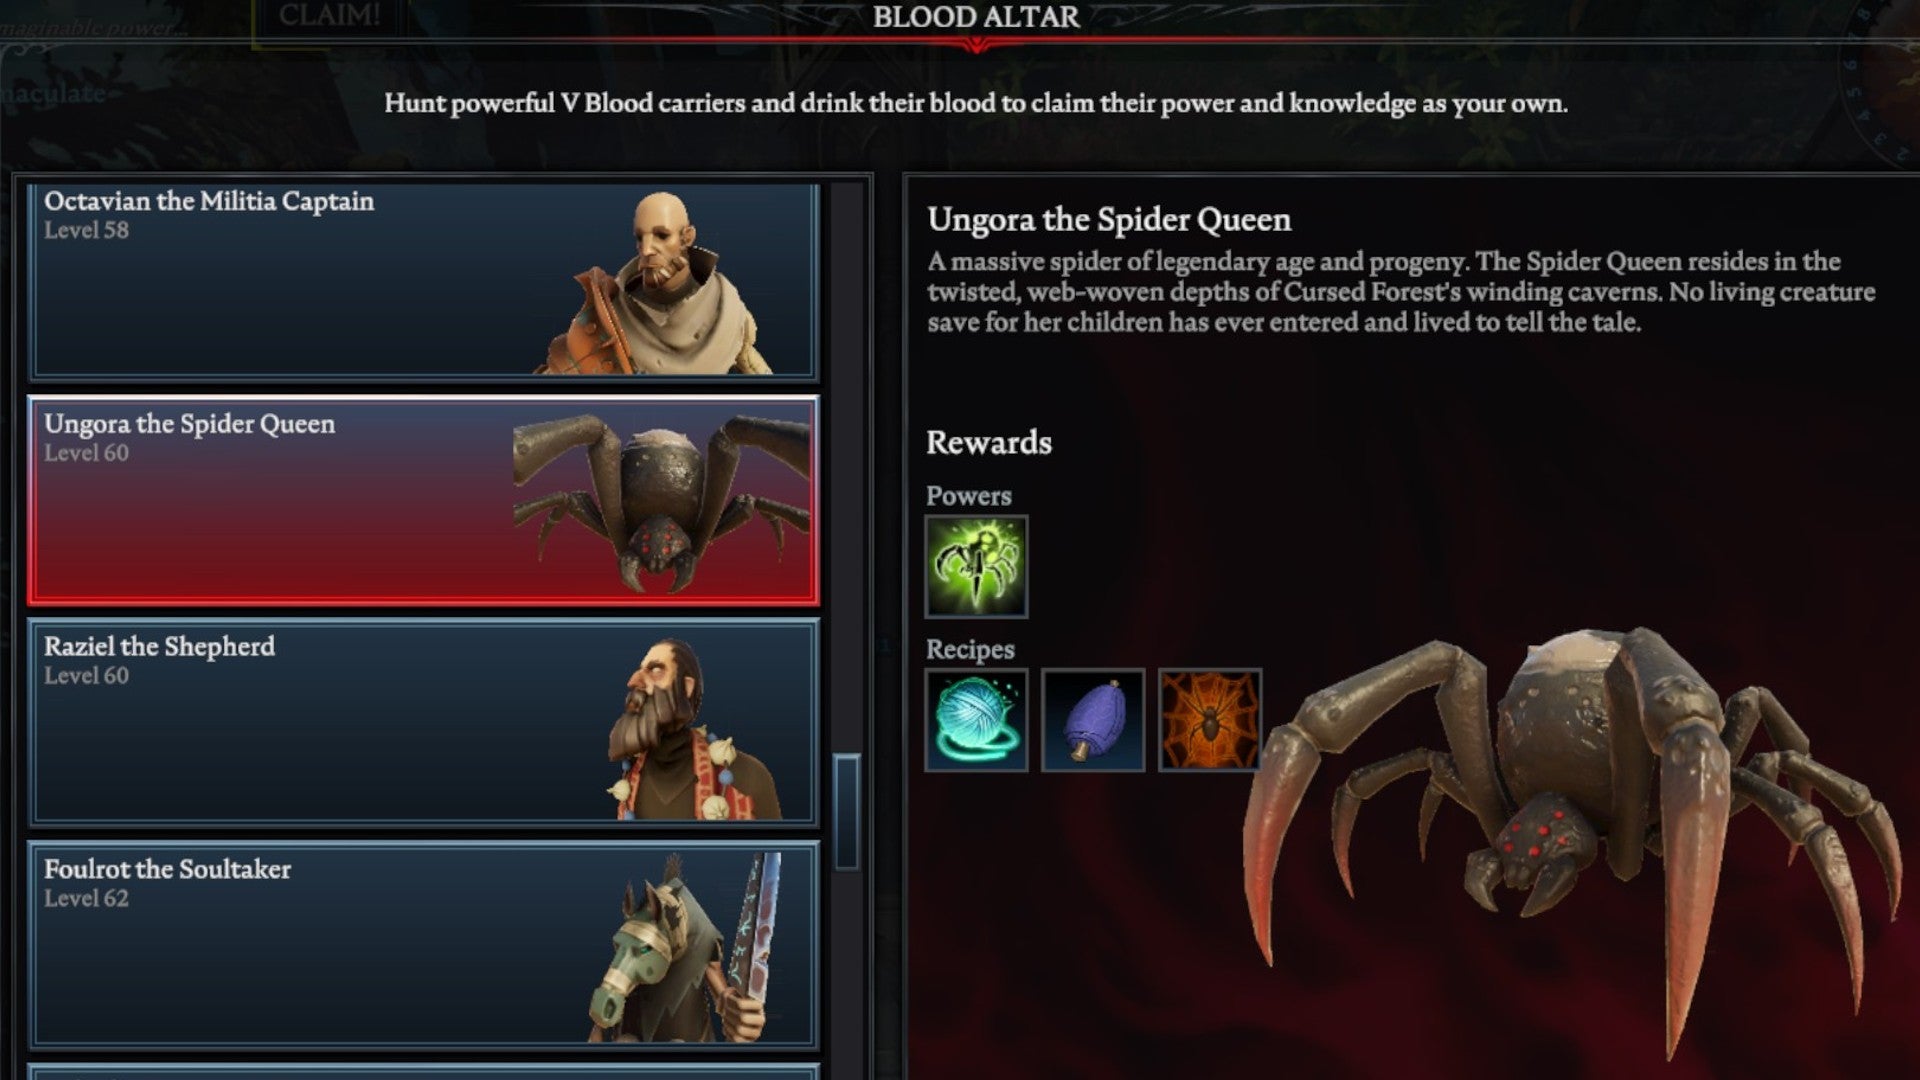 V Rising Ungora the Spider Queen Blood Altar tracking page, showing an image of the spider queen on the right and a list of bosses on the left